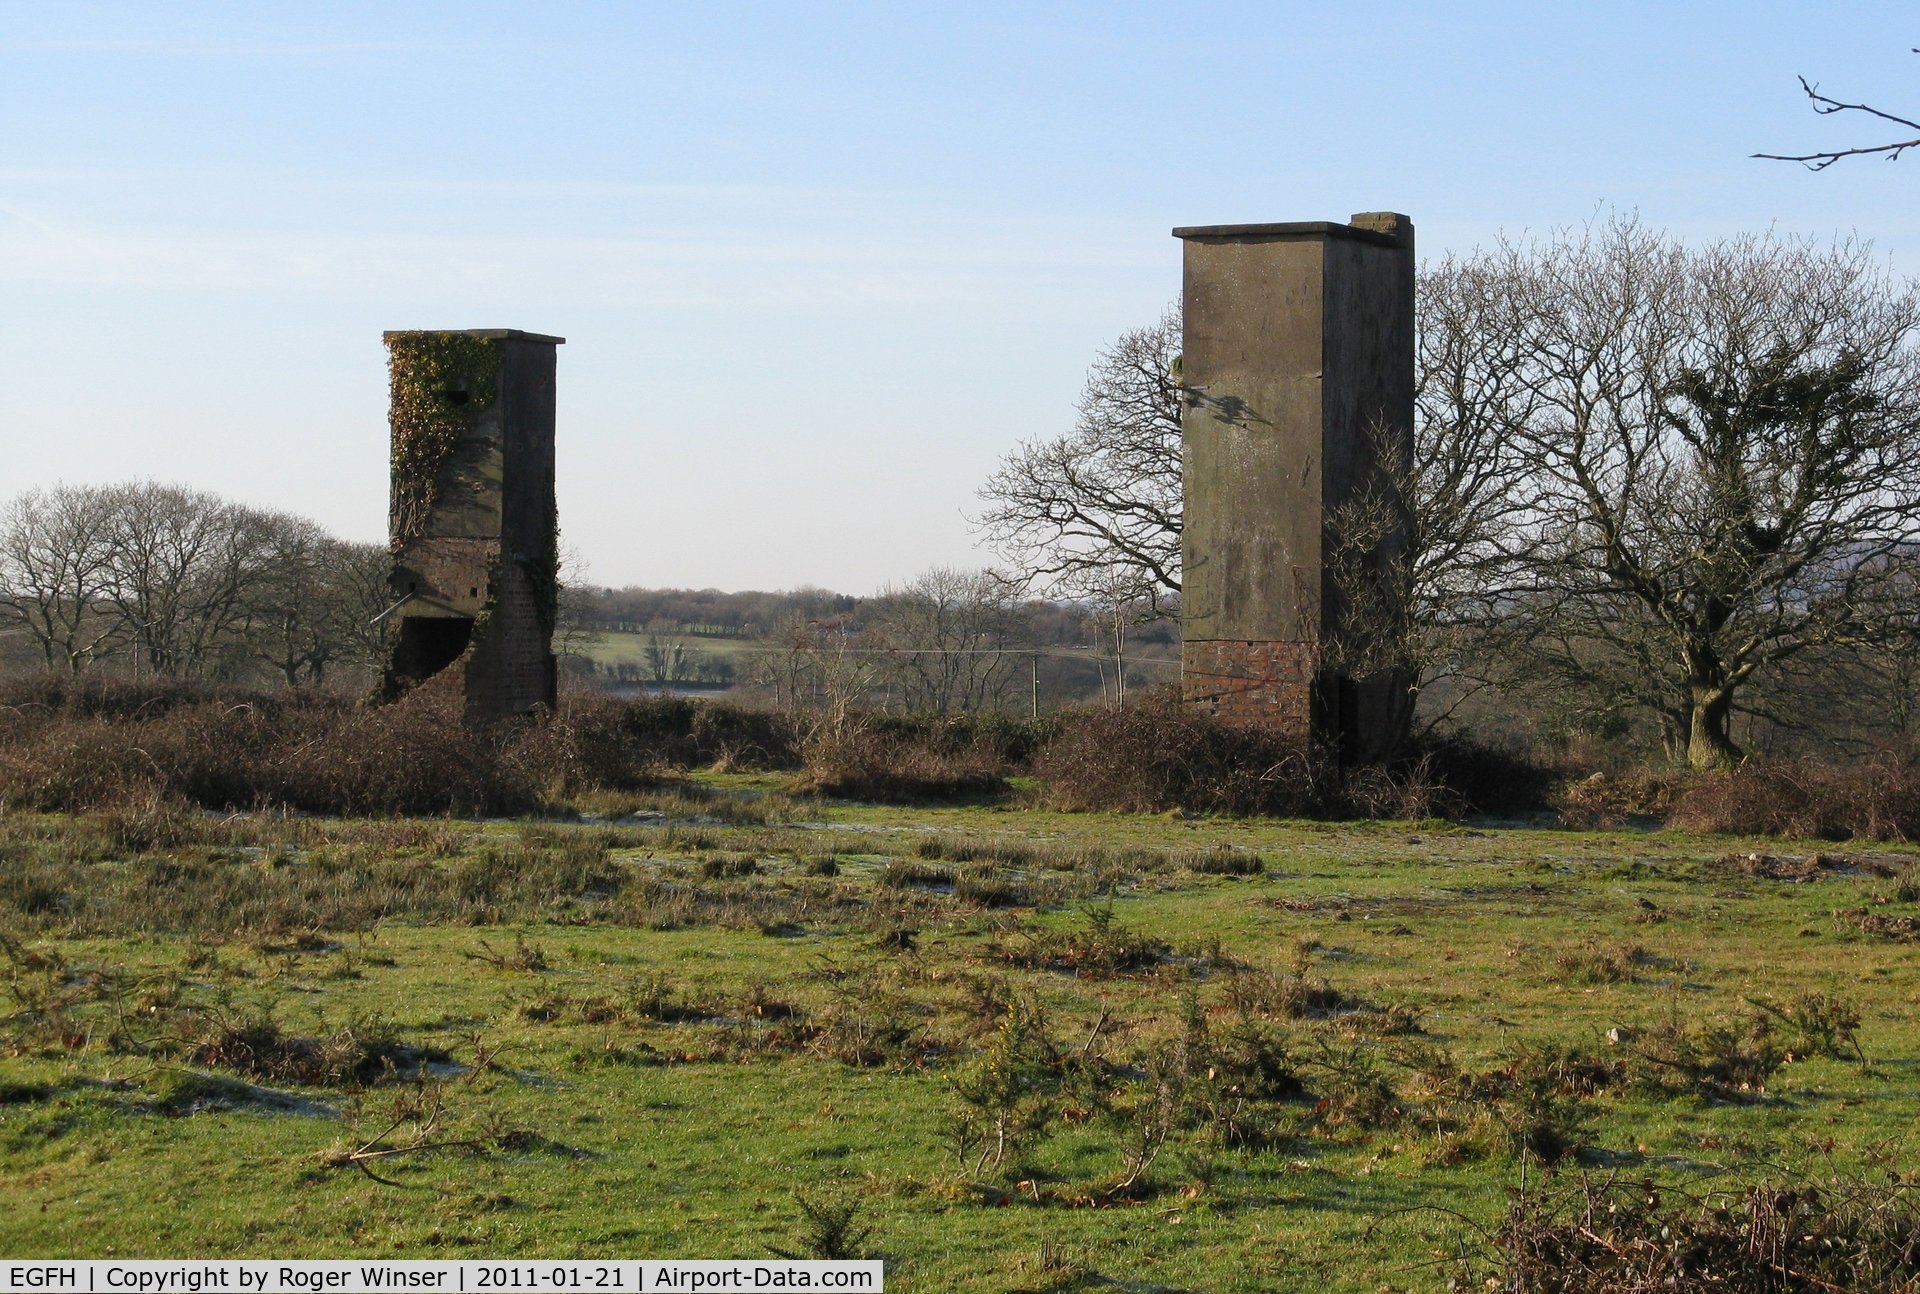 Swansea Airport, Swansea, Wales United Kingdom (EGFH) - Remains of 1940's Officers Mess situated on the former RAF Fairwood Common airfield Dispersed Site No 9 near the airport.